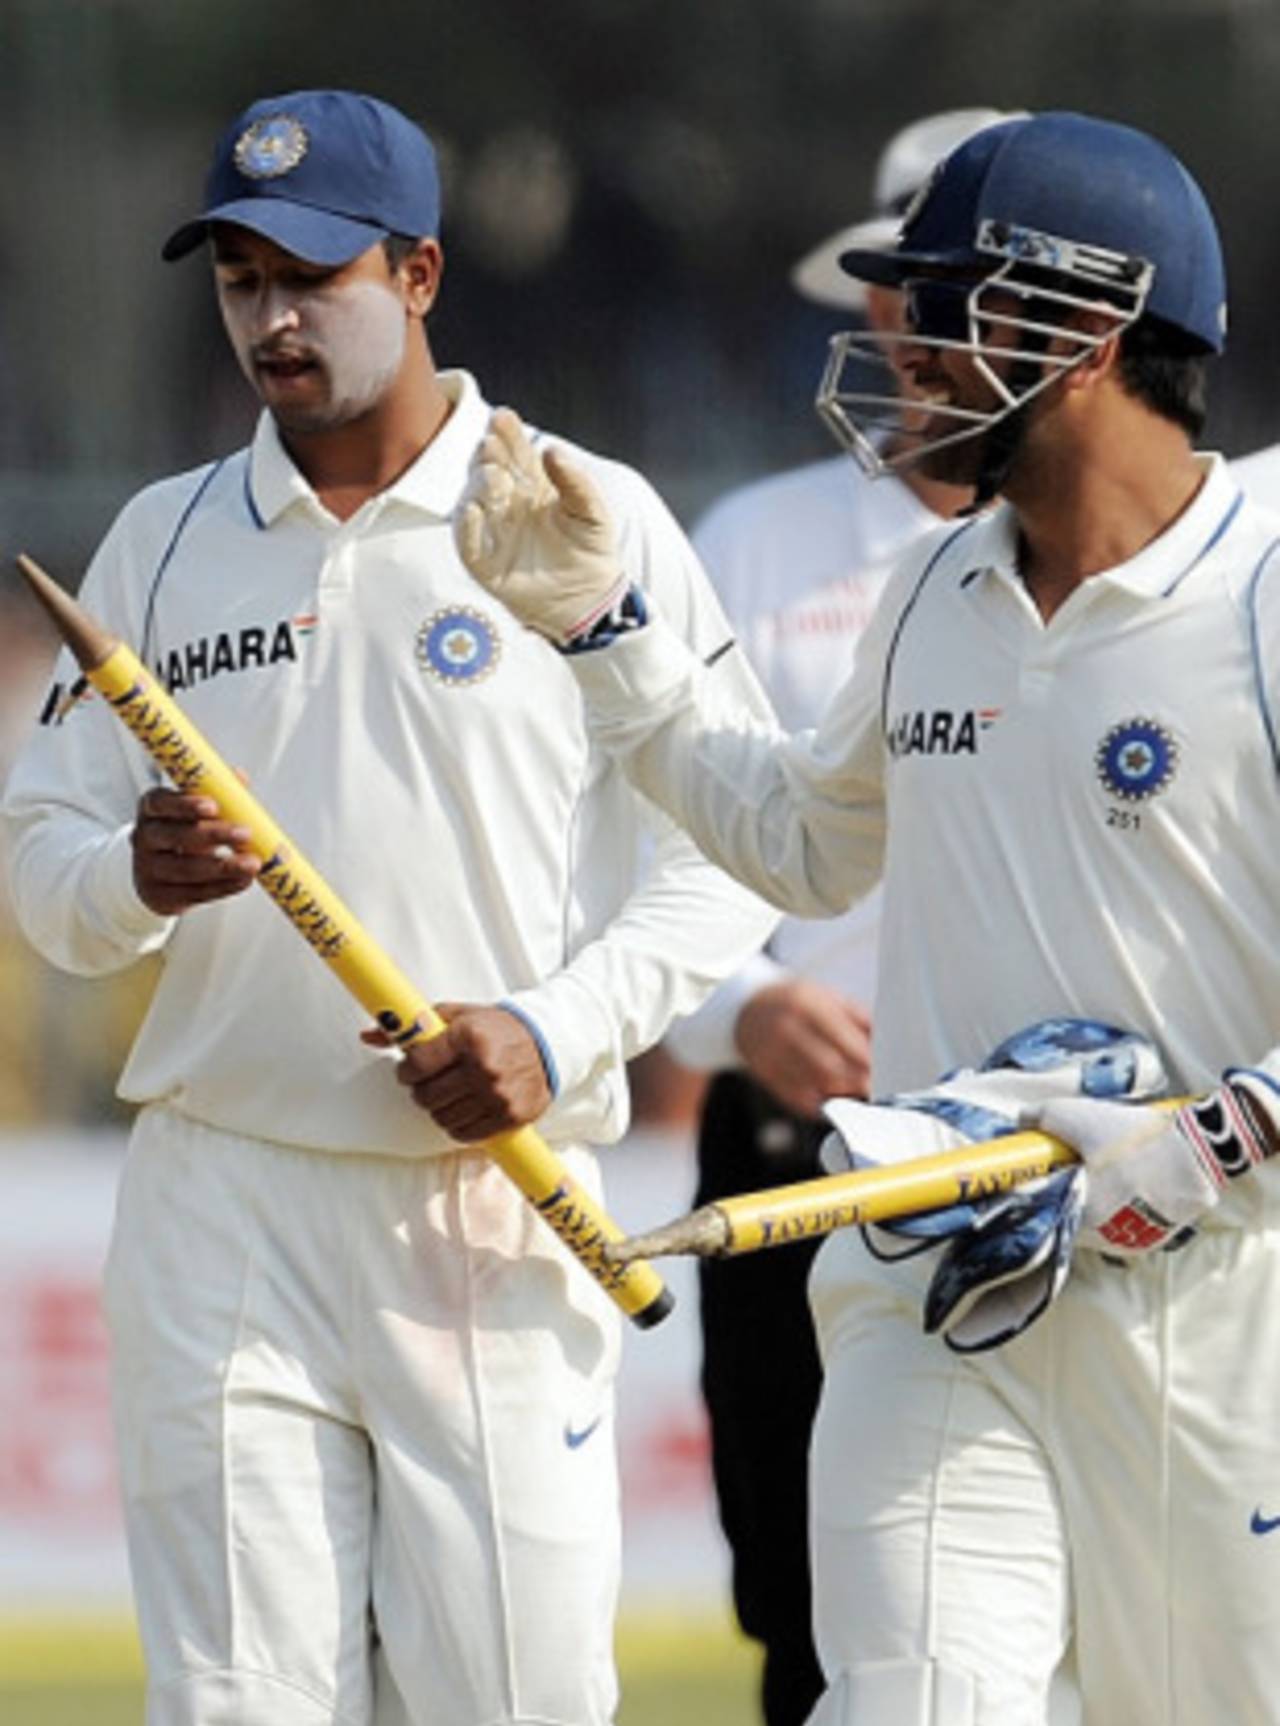 Pragyan Ojha gets the congratulations from MS Dhoni as India walk off victorious, India v Sri Lanka, 2nd Test, Kanpur, 4th day, November 27, 2009